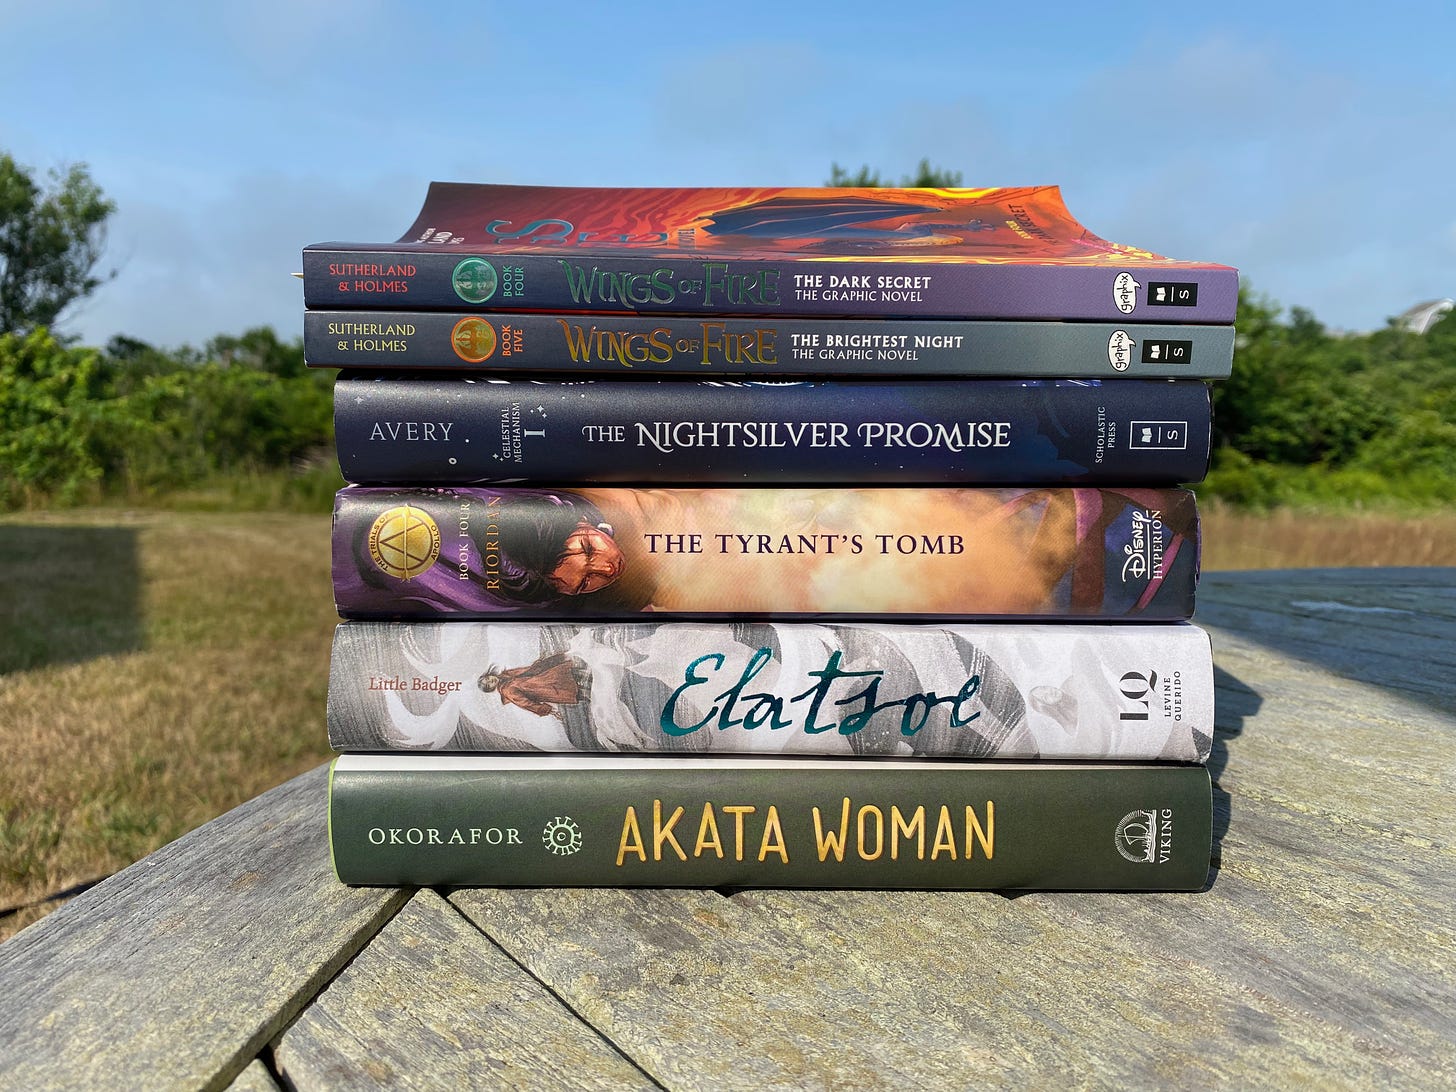 A stack of books on a picnic table in a sunny yard. The books arel Akata Woman, Elatsoe, The Tyrant’s Tomb, The Nightsilver Promise, and two volumes of The Wings of Fire graphic novels.